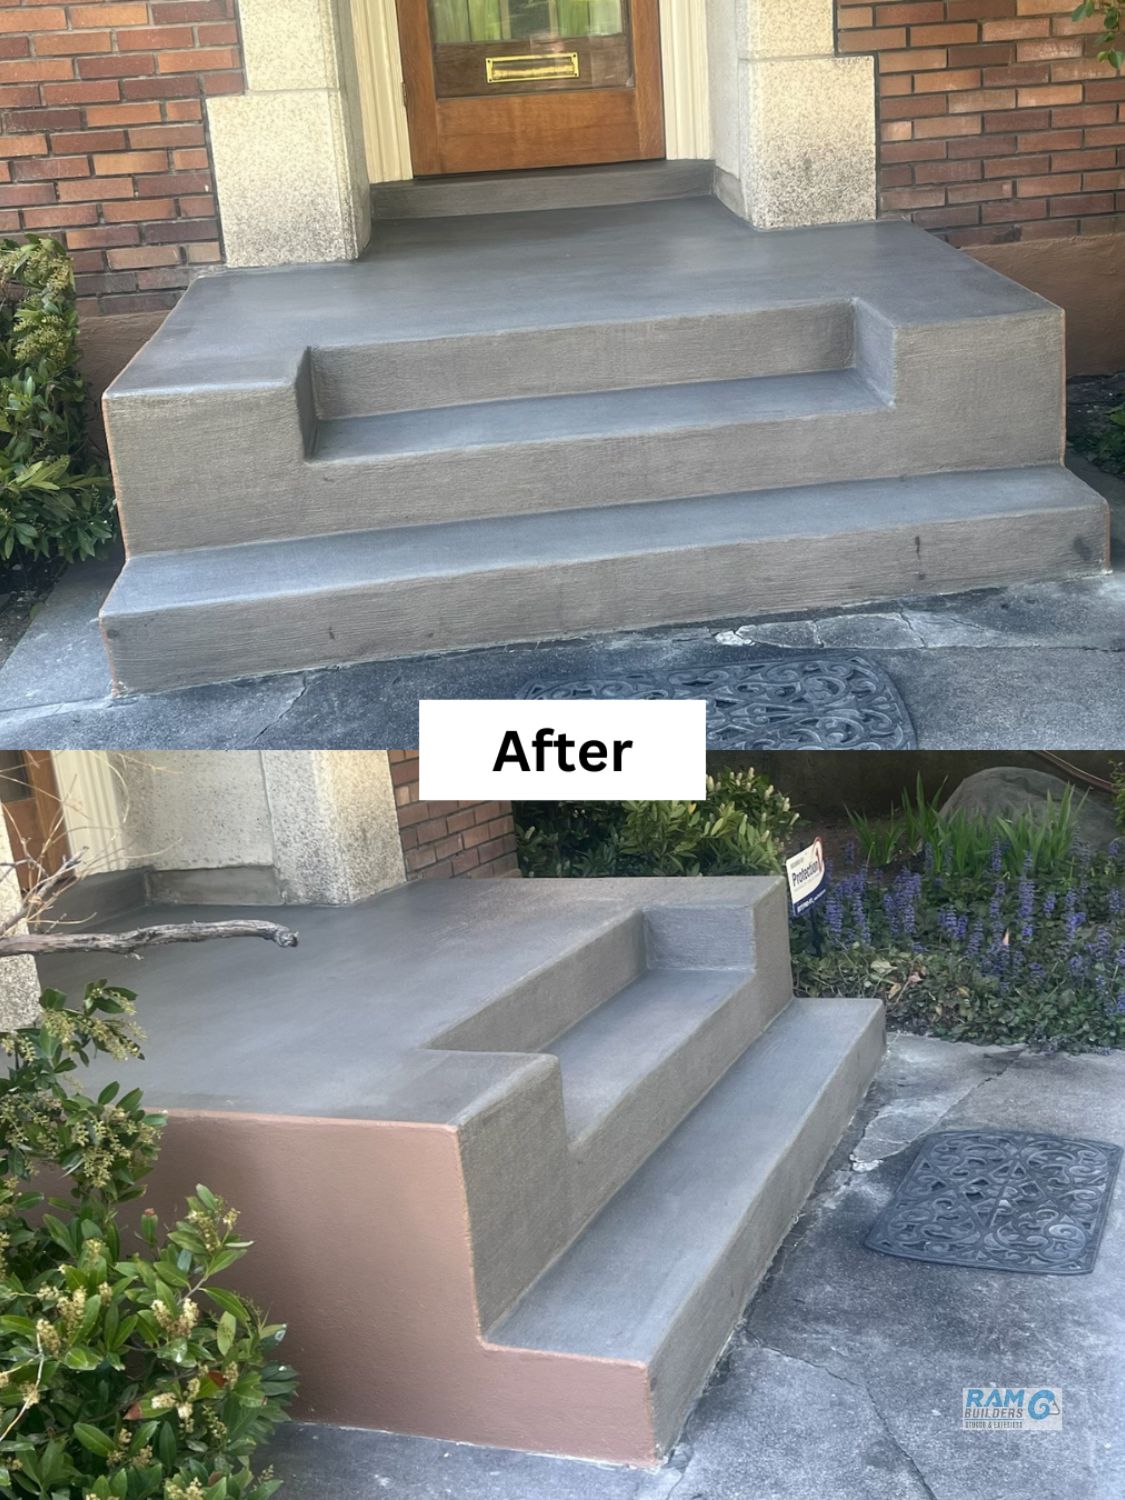 Concrete Porch Stair Repair Project After Work by RAM Builders Stucco & Exteriors